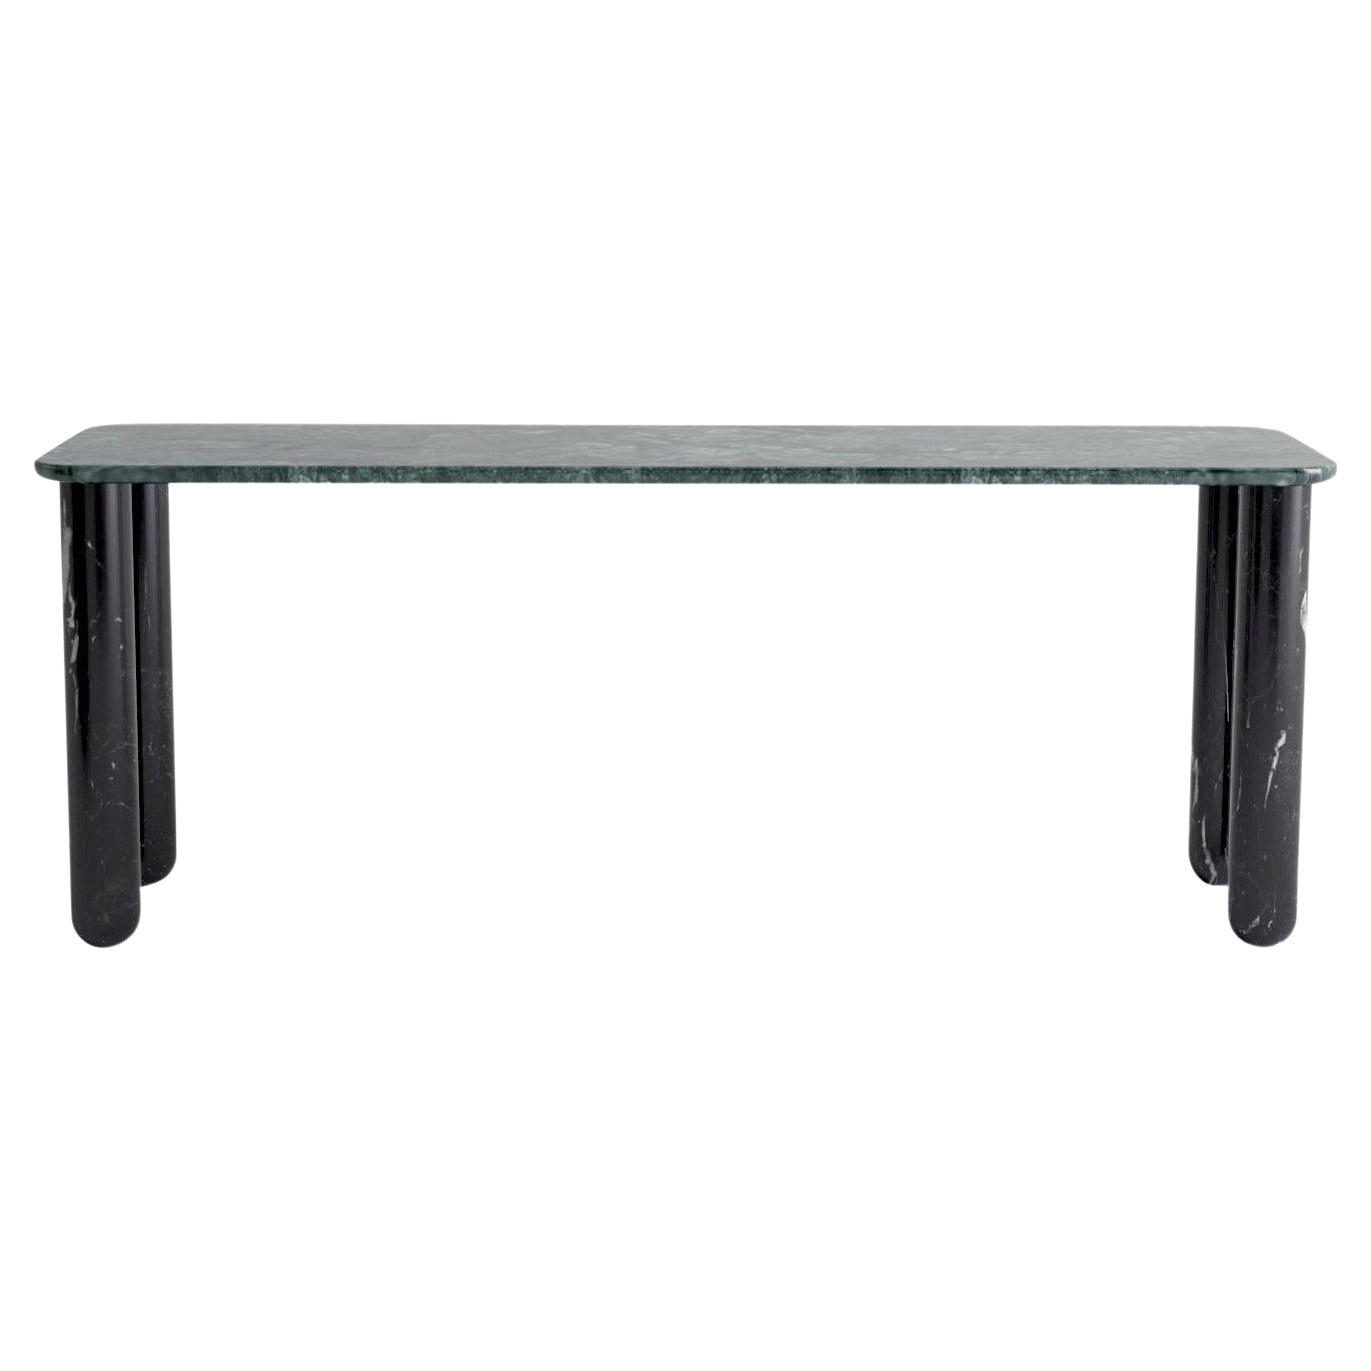 Large Green and Black Marble "Sunday" Dining Table, Jean-Baptiste Souletie For Sale